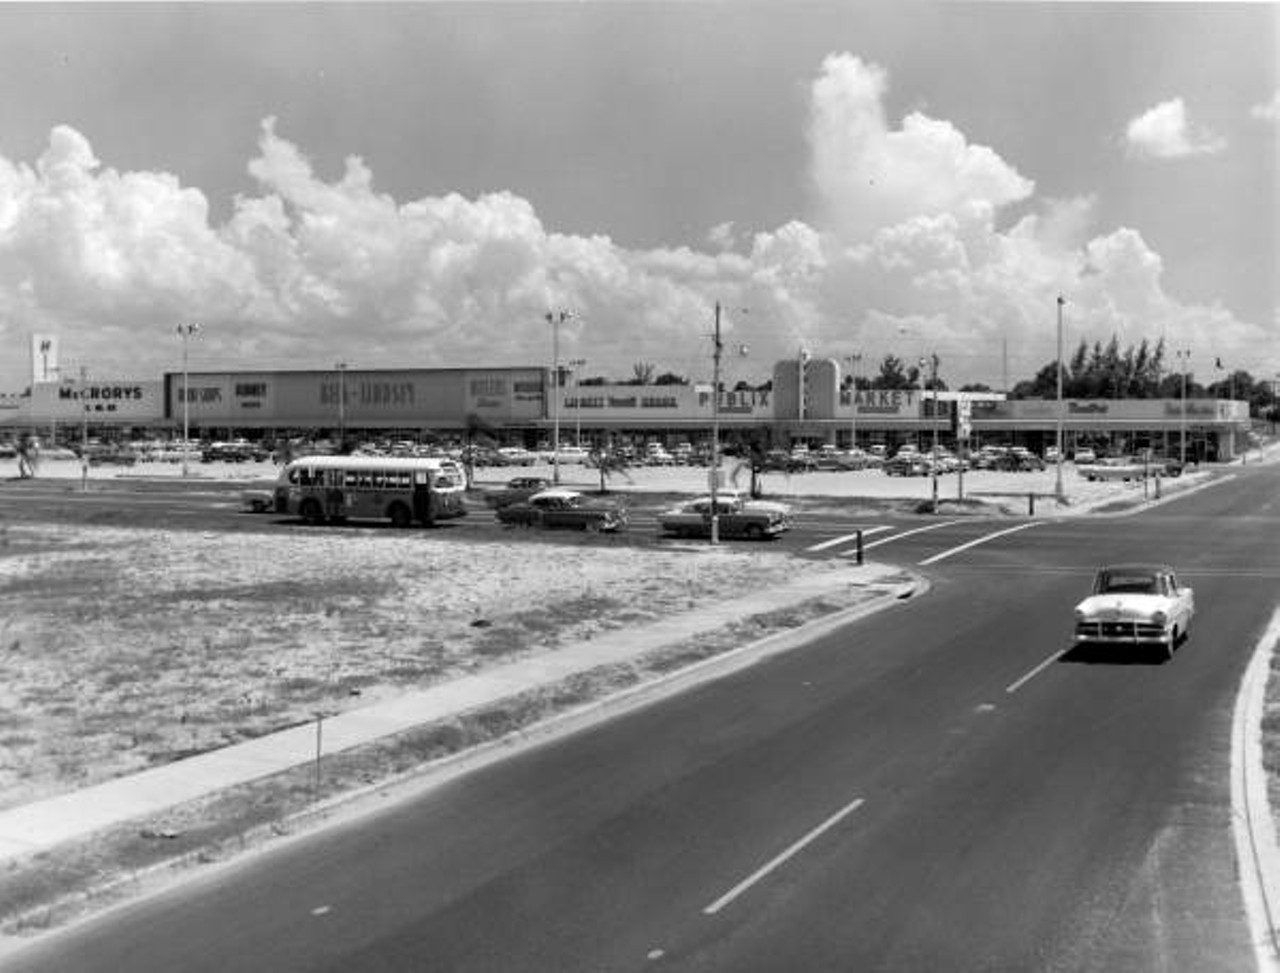 View of Road 55 and Publix shopping center - Pinellas County, Florida, 1955.